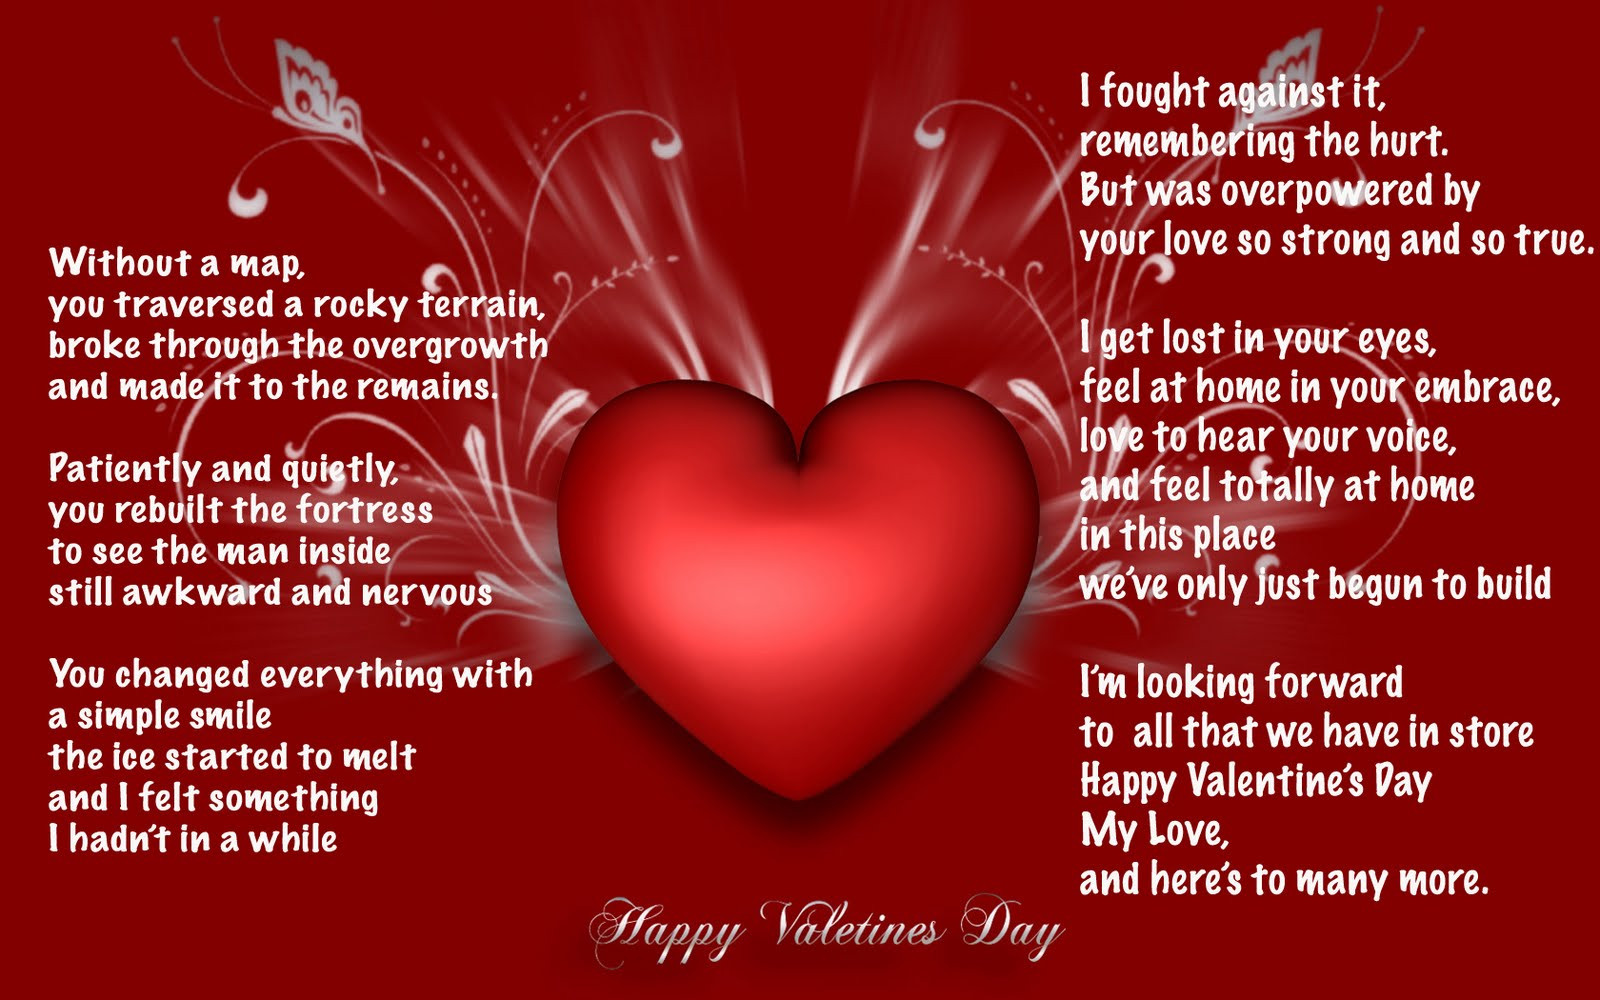 Quotes for Valentines Day Luxury Valentines Day Quotes 2013 New Latest Pictures